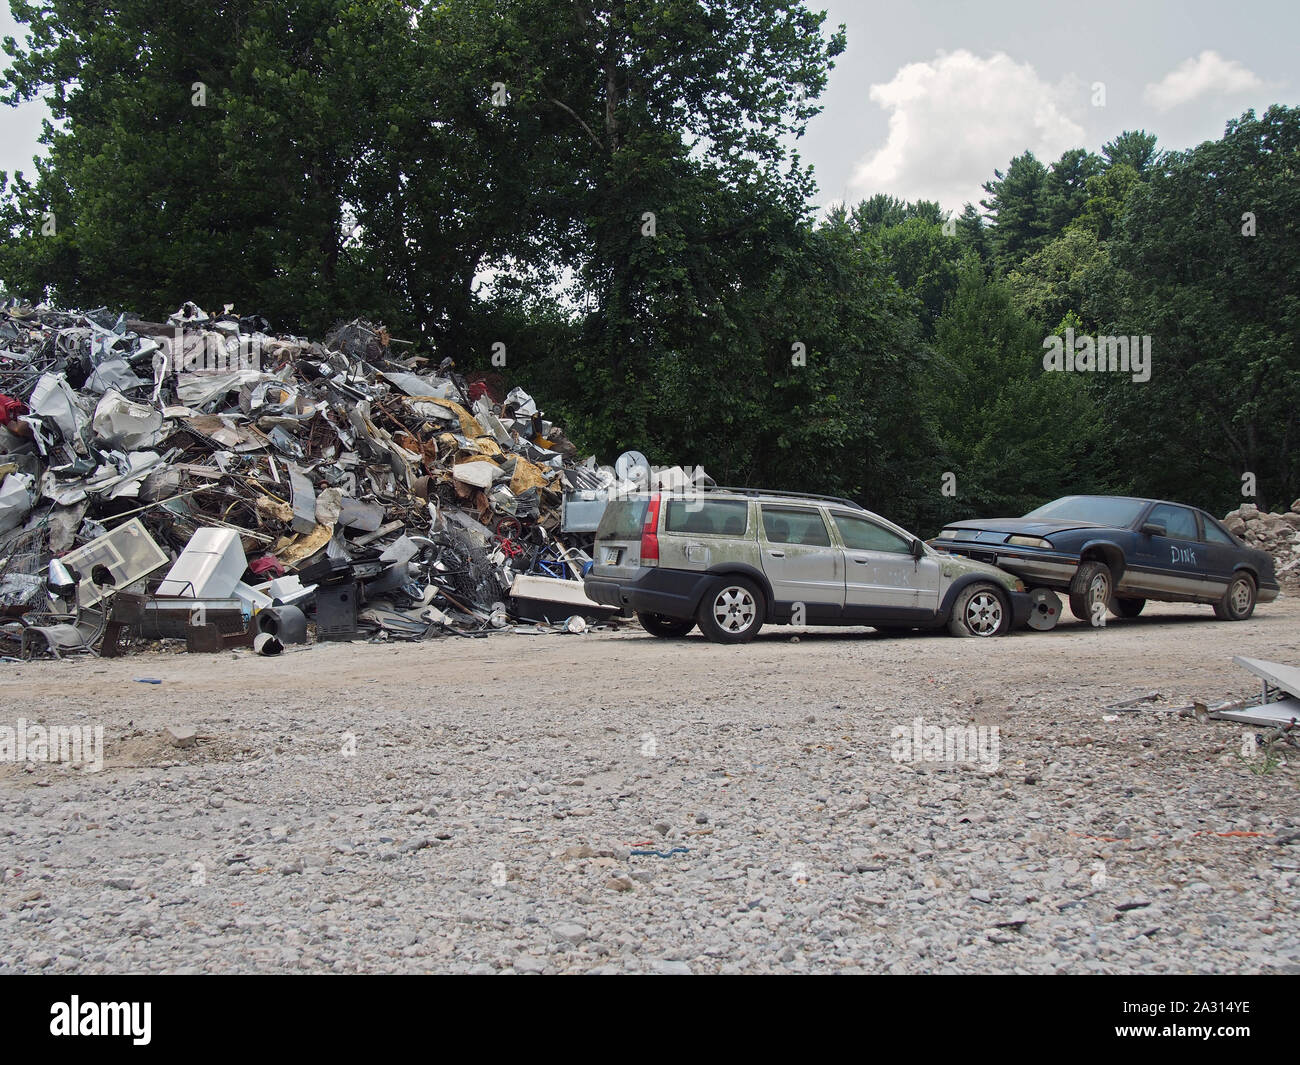 Junk pile and trashed automobiles at a junkyard in Indiana, USA, July 28, 2019, © Katharine Andriotis Stock Photo